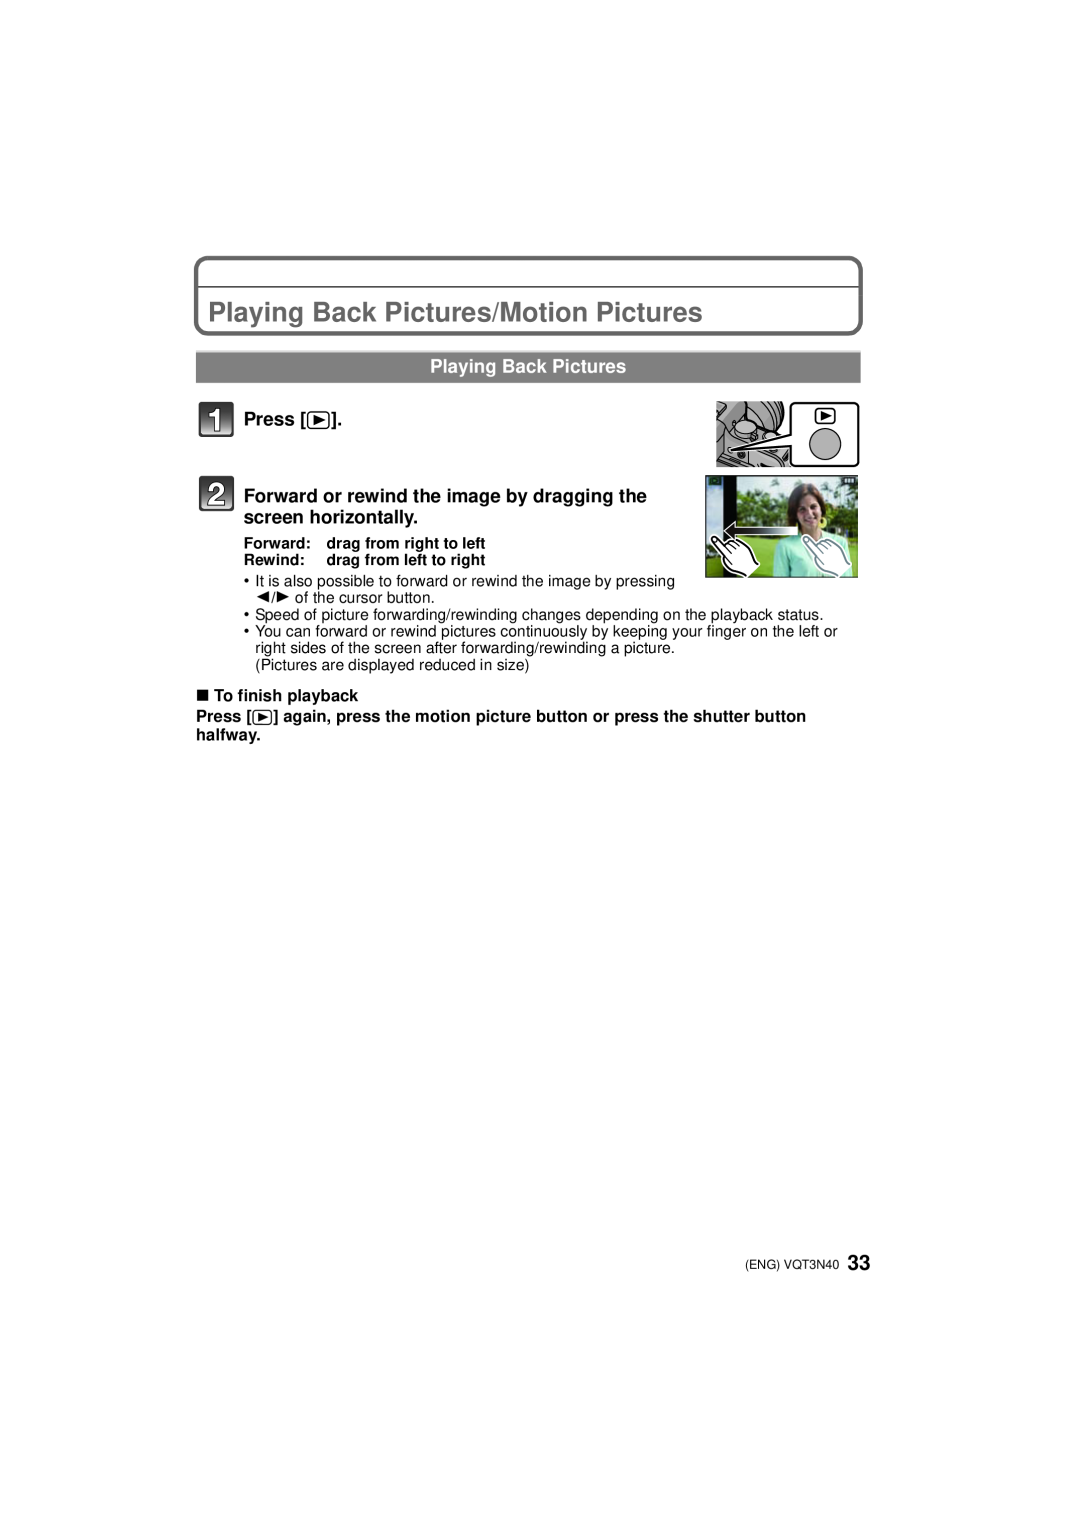 Panasonic DMC-G3K, DMC-G3W, DMCG3KK owner manual Playing Back Pictures/Motion Pictures, ∫ To finish playback 